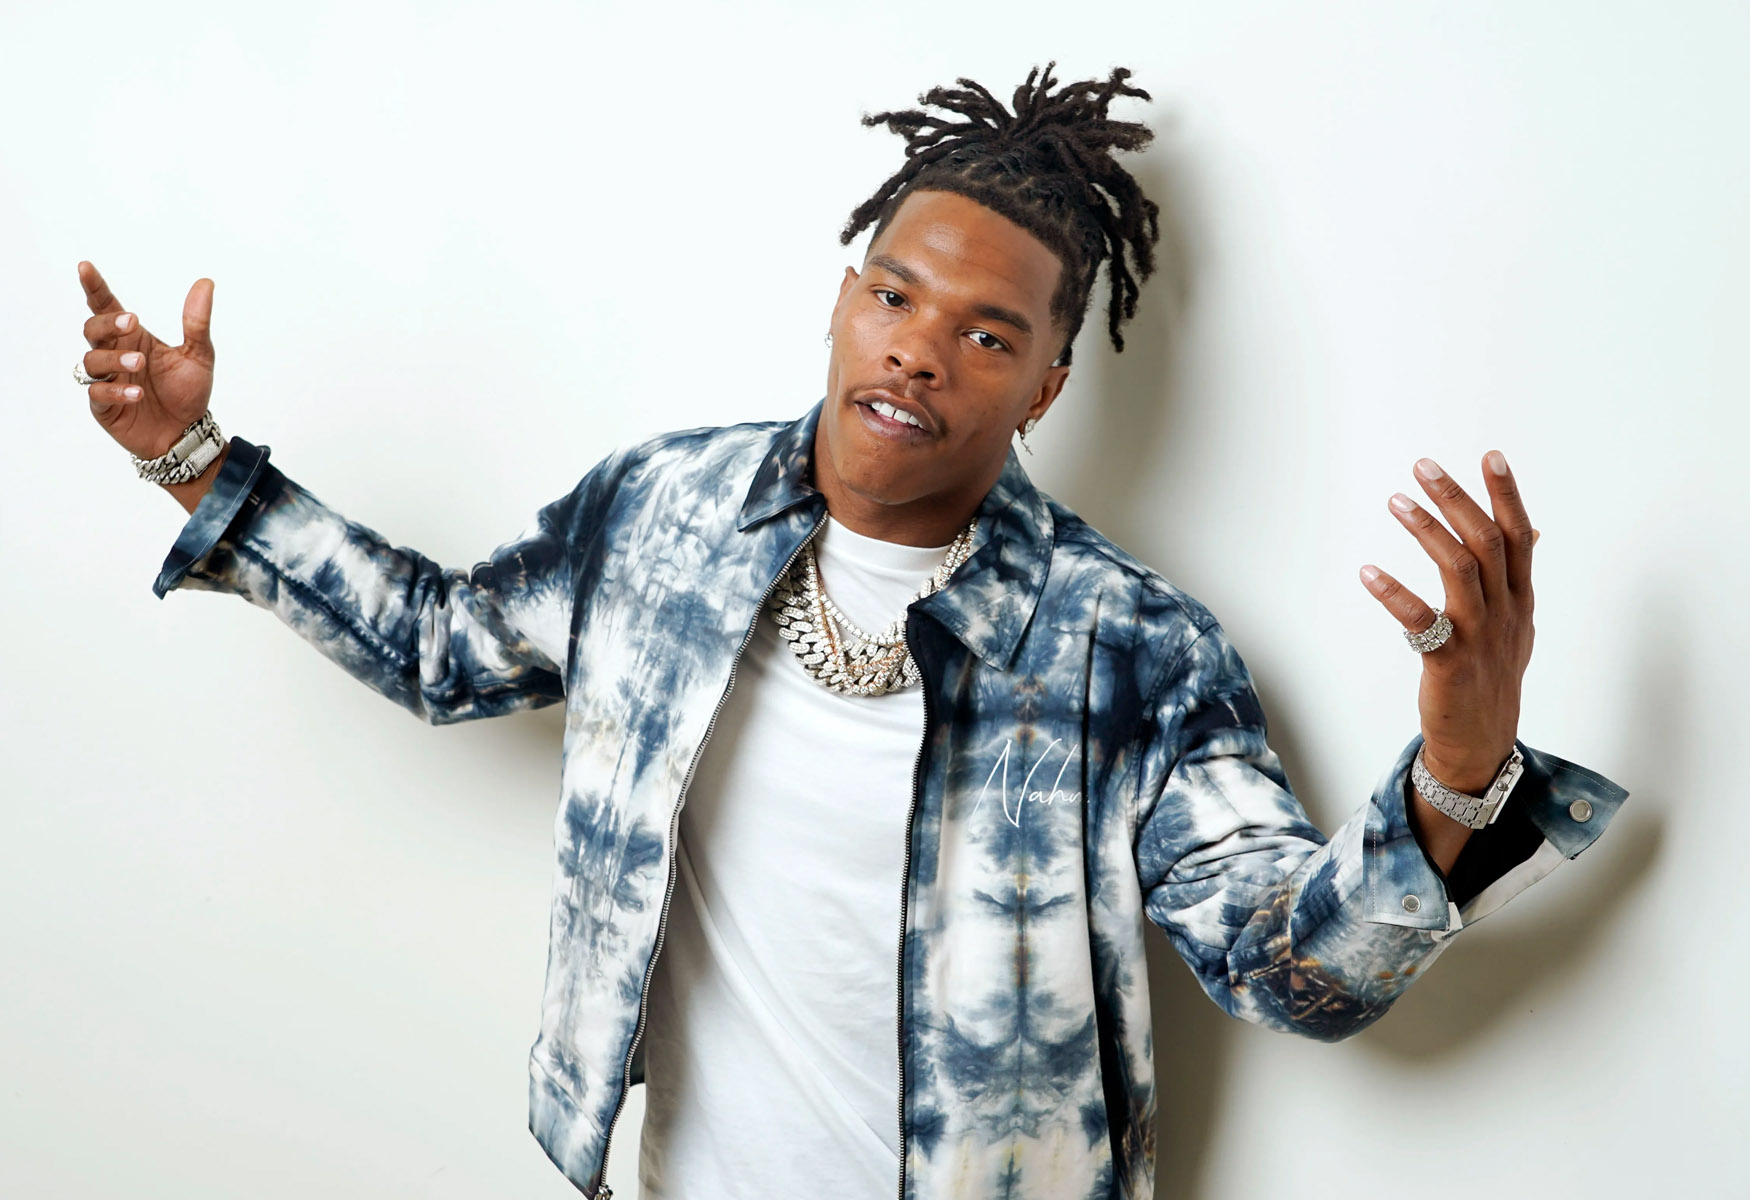 lil-baby-denies-involvement-in-explicit-video-calls-out-misinformation